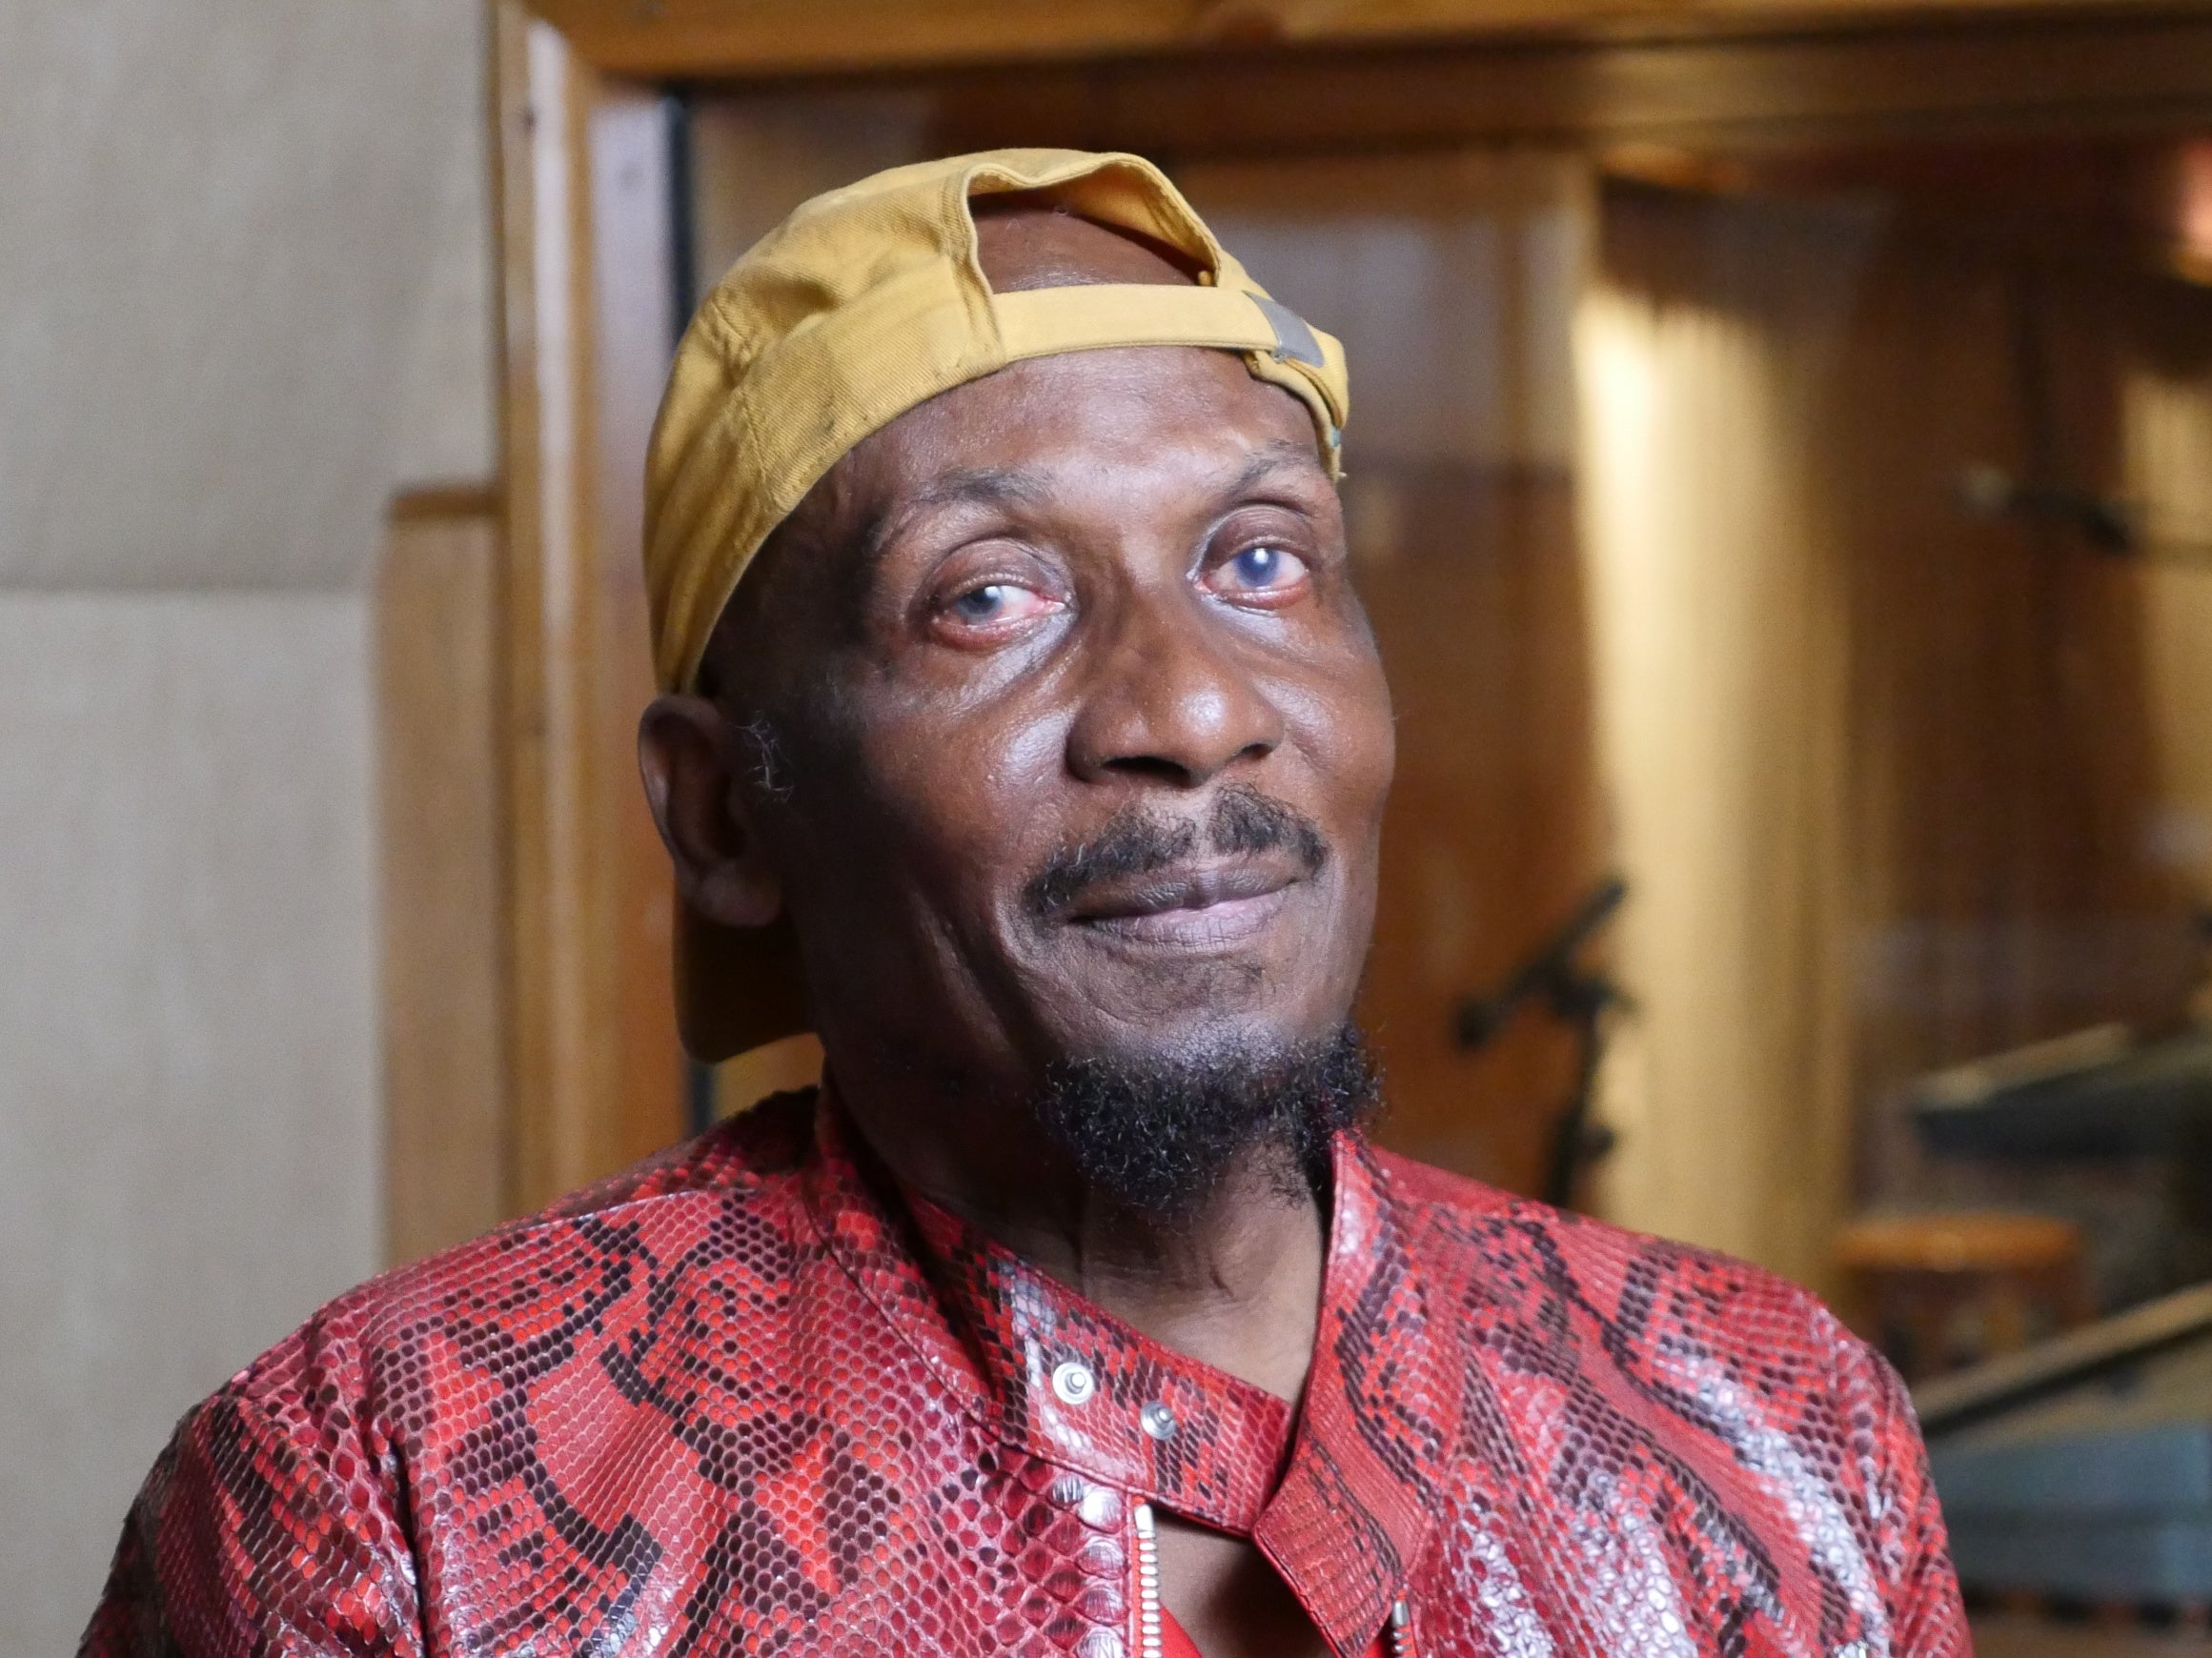 Watch: Reggae's Glory Days Are Revisited In Must-See Documentary